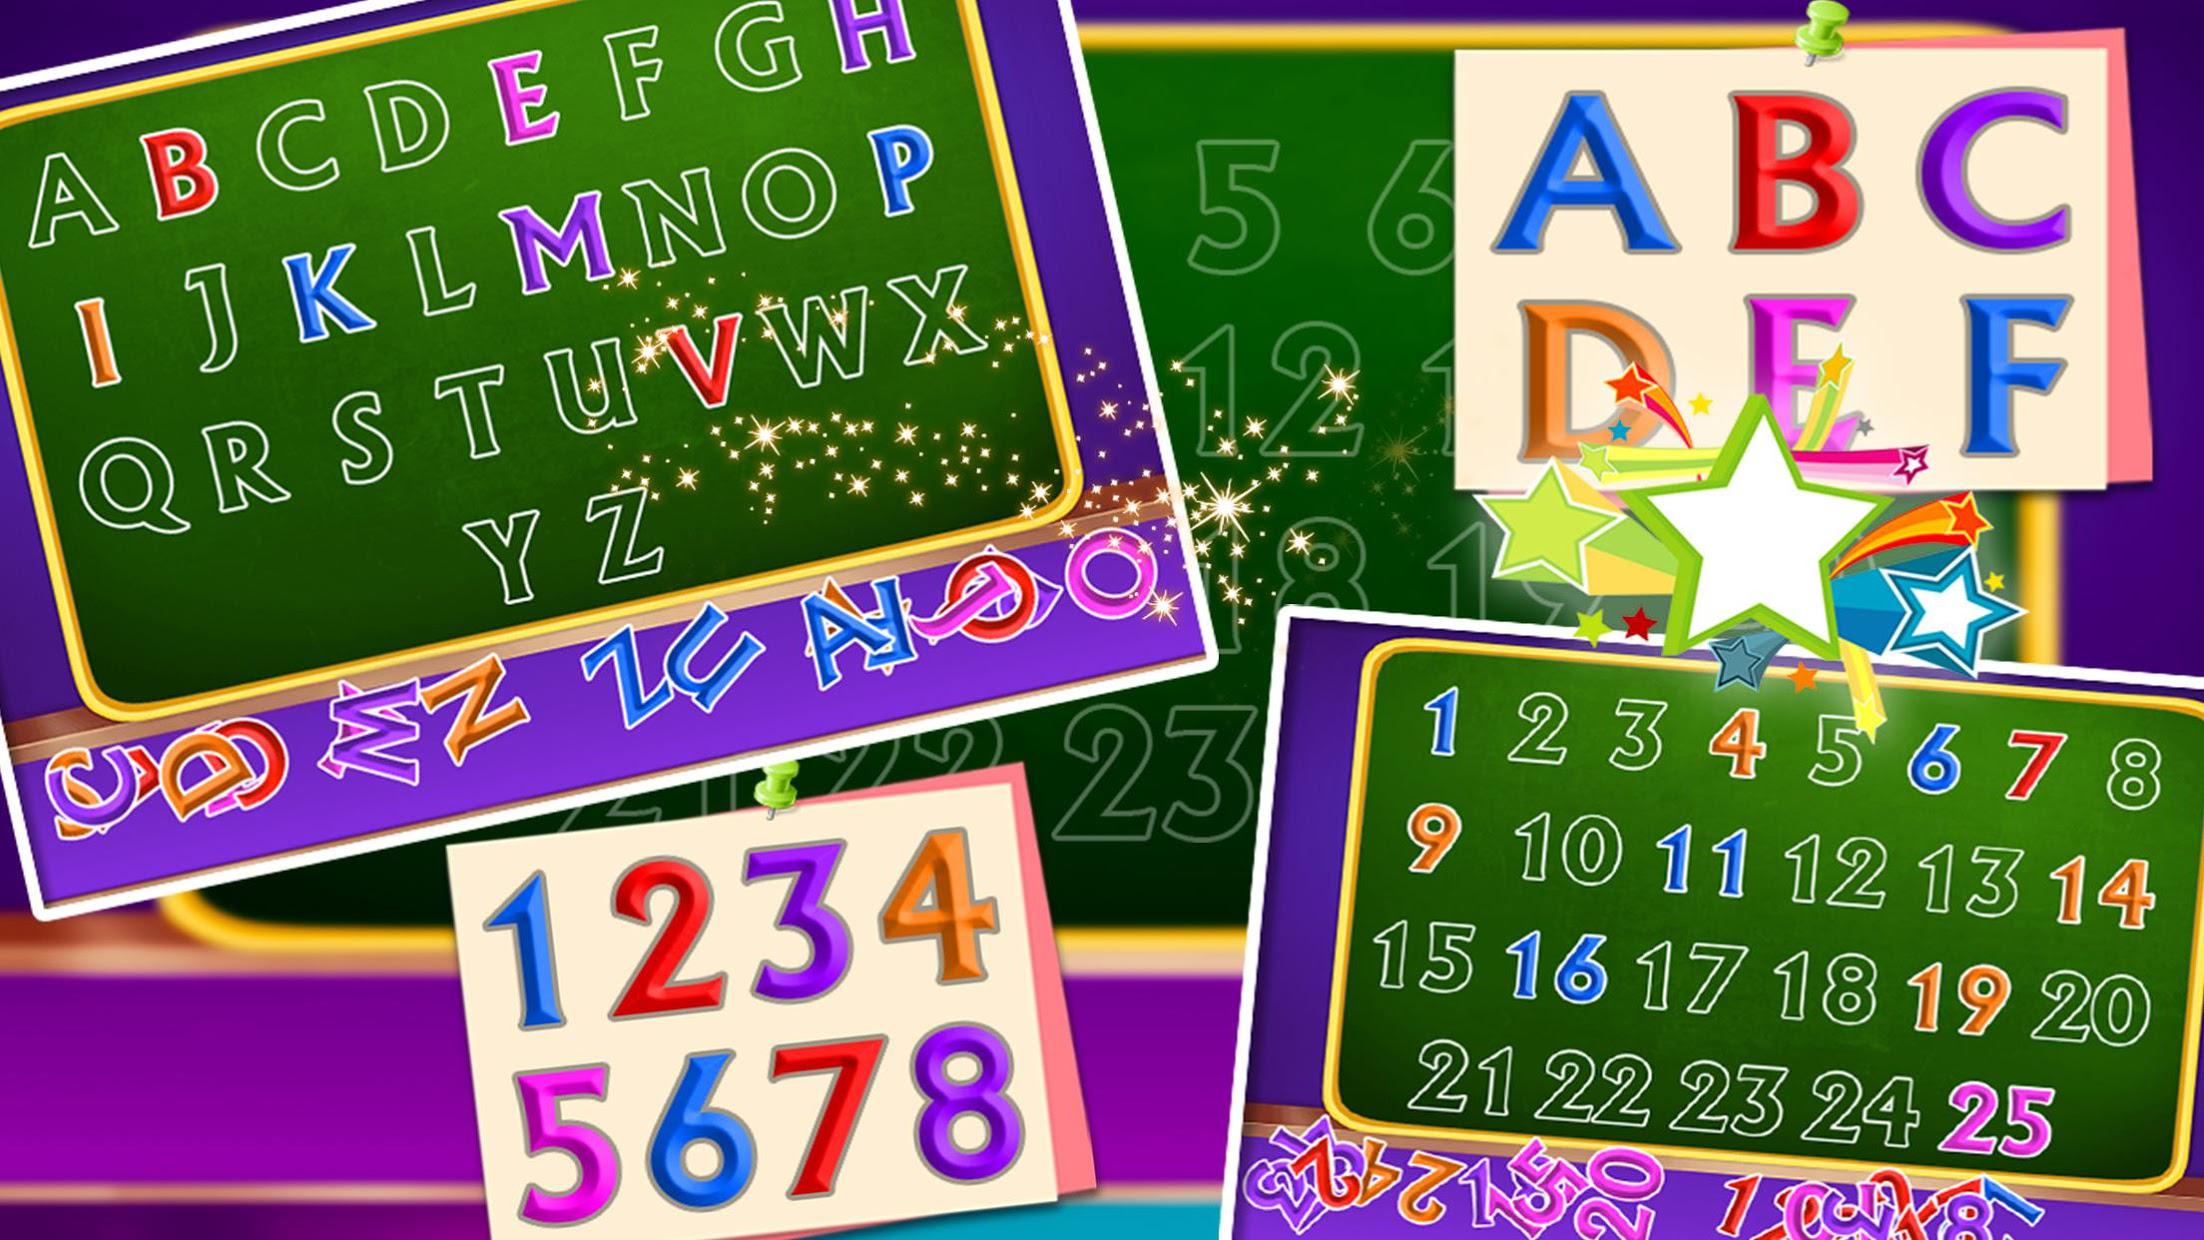 Preschool: Learning Numbers and Letters_截图_2